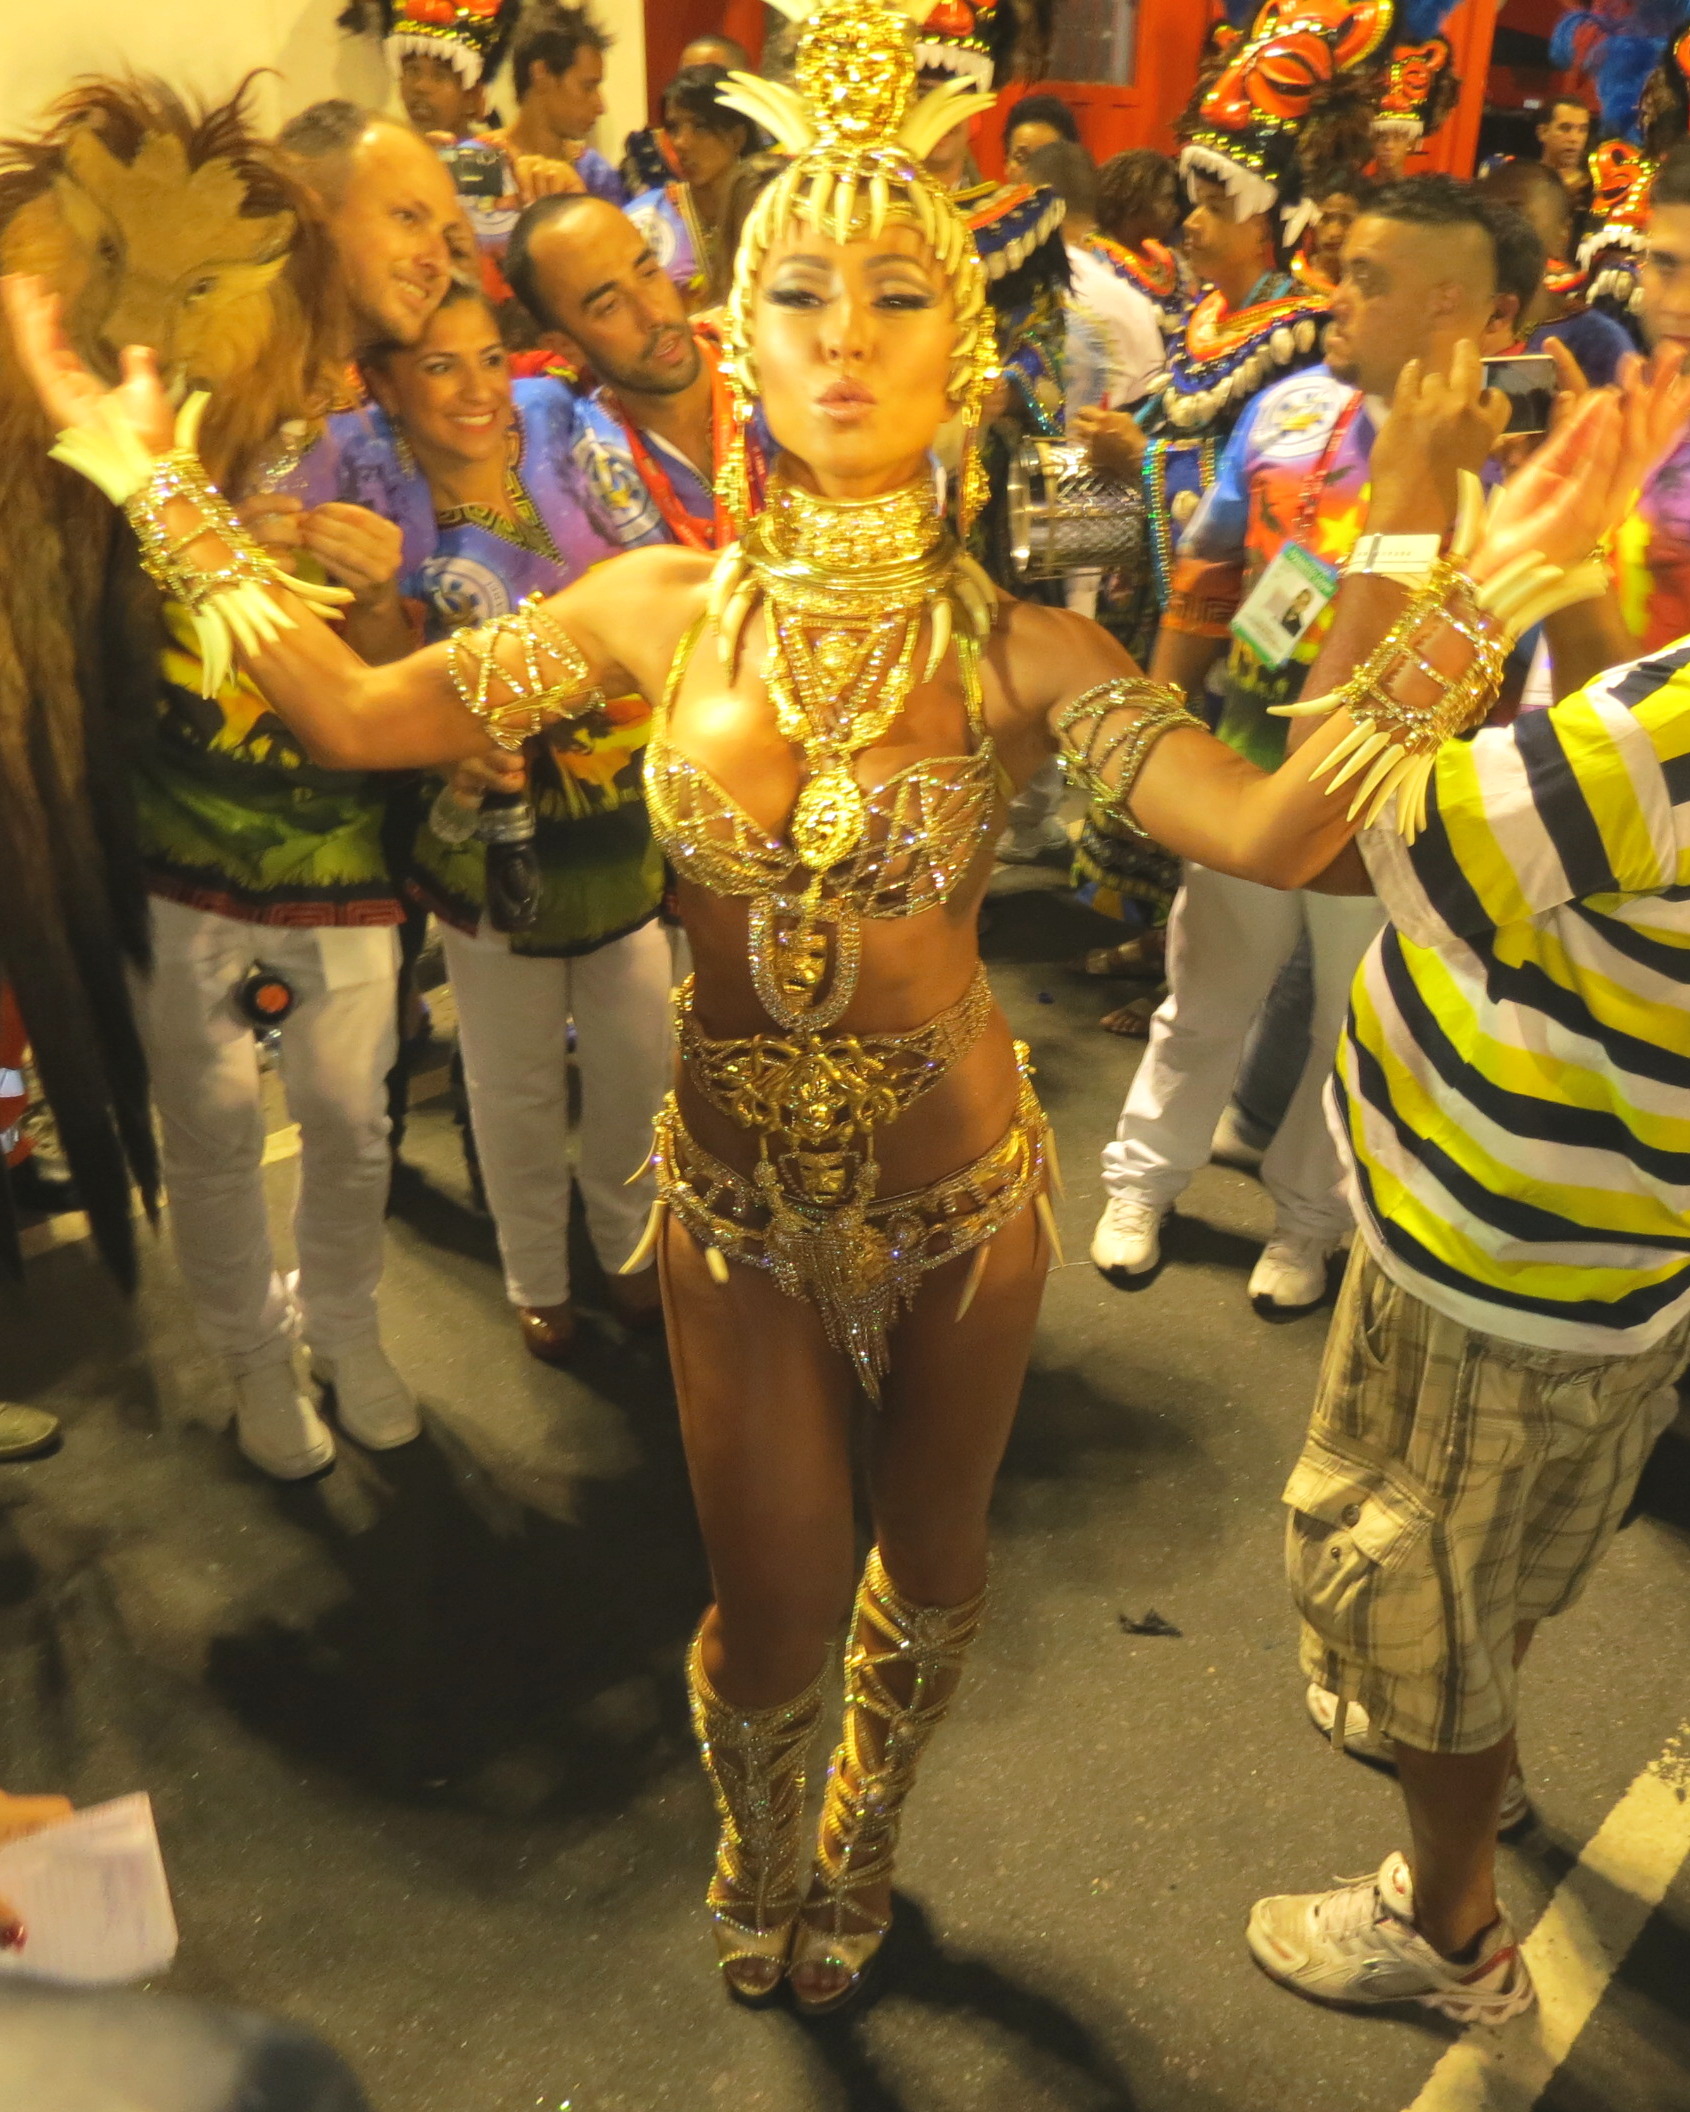 a woman wearing gold and costume stands in the middle of a crowd